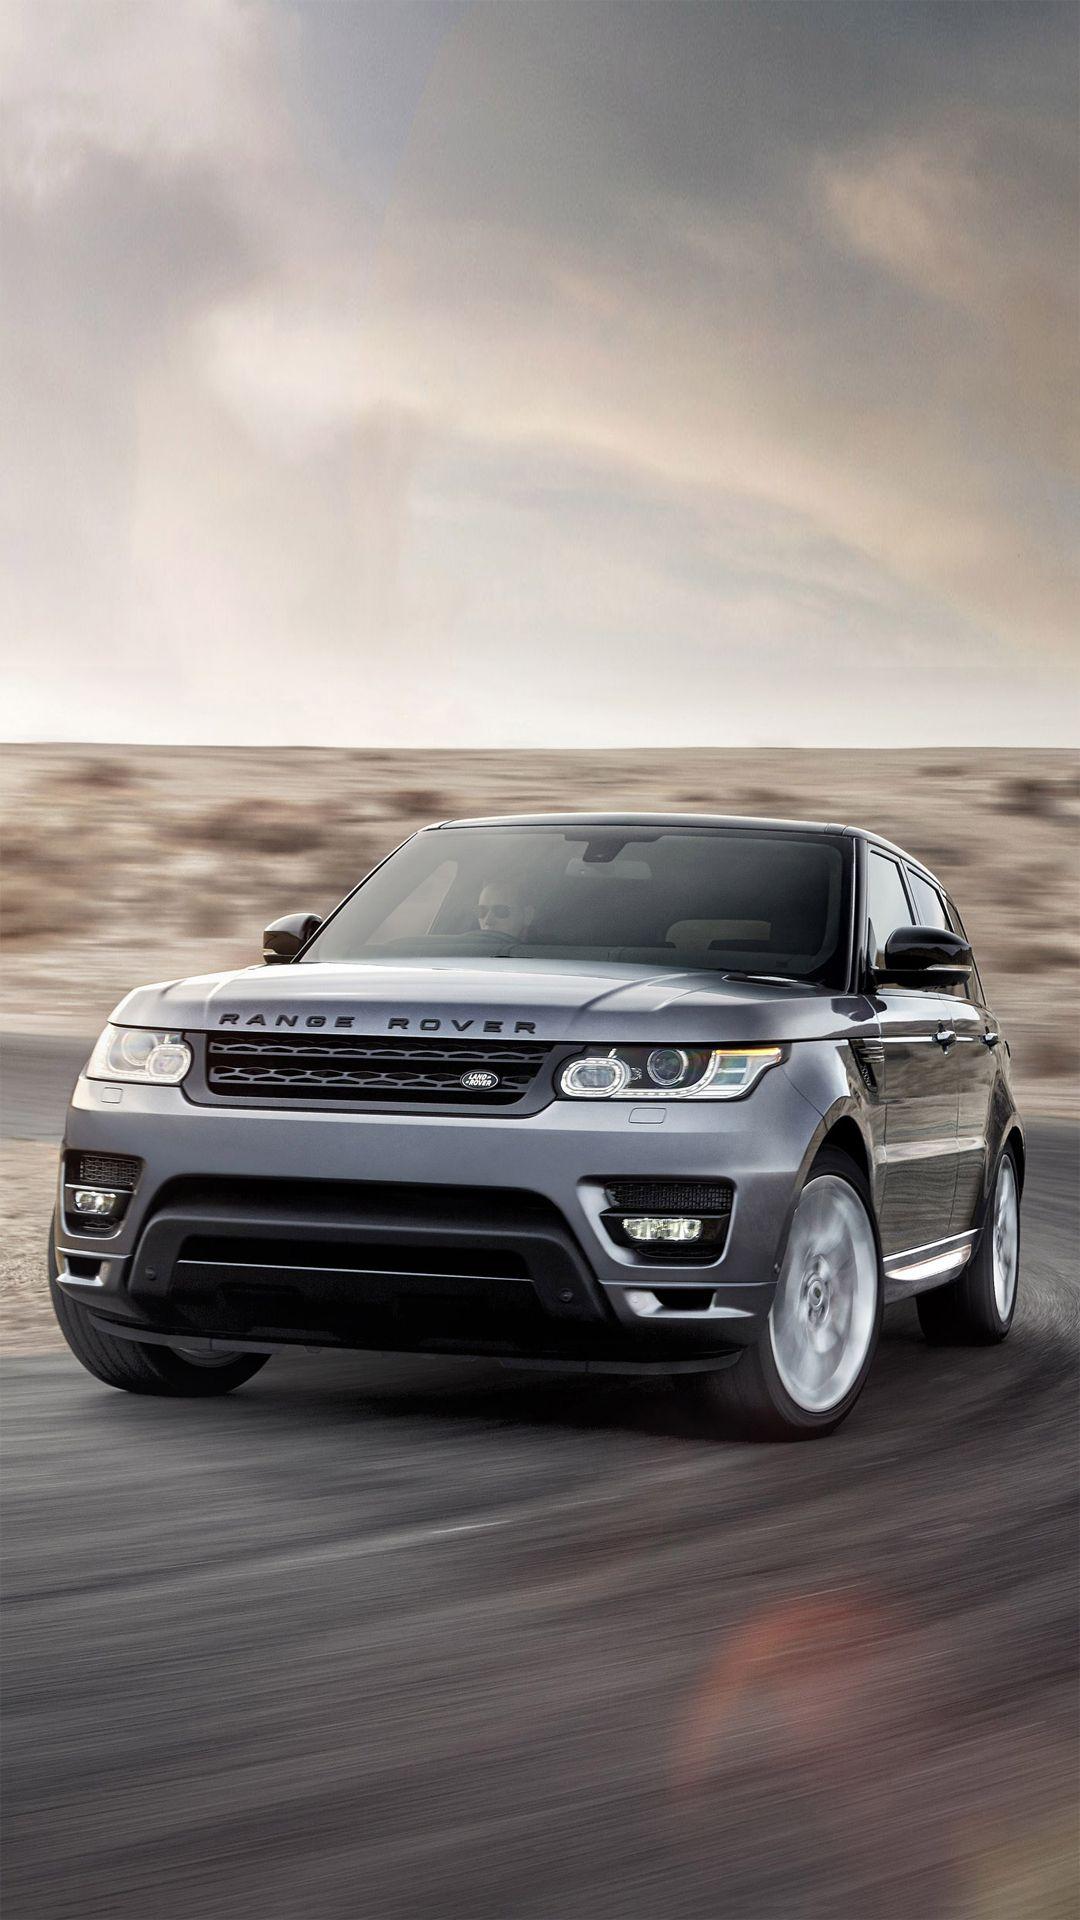 Range Rover sportK wallpaper, free and easy to download